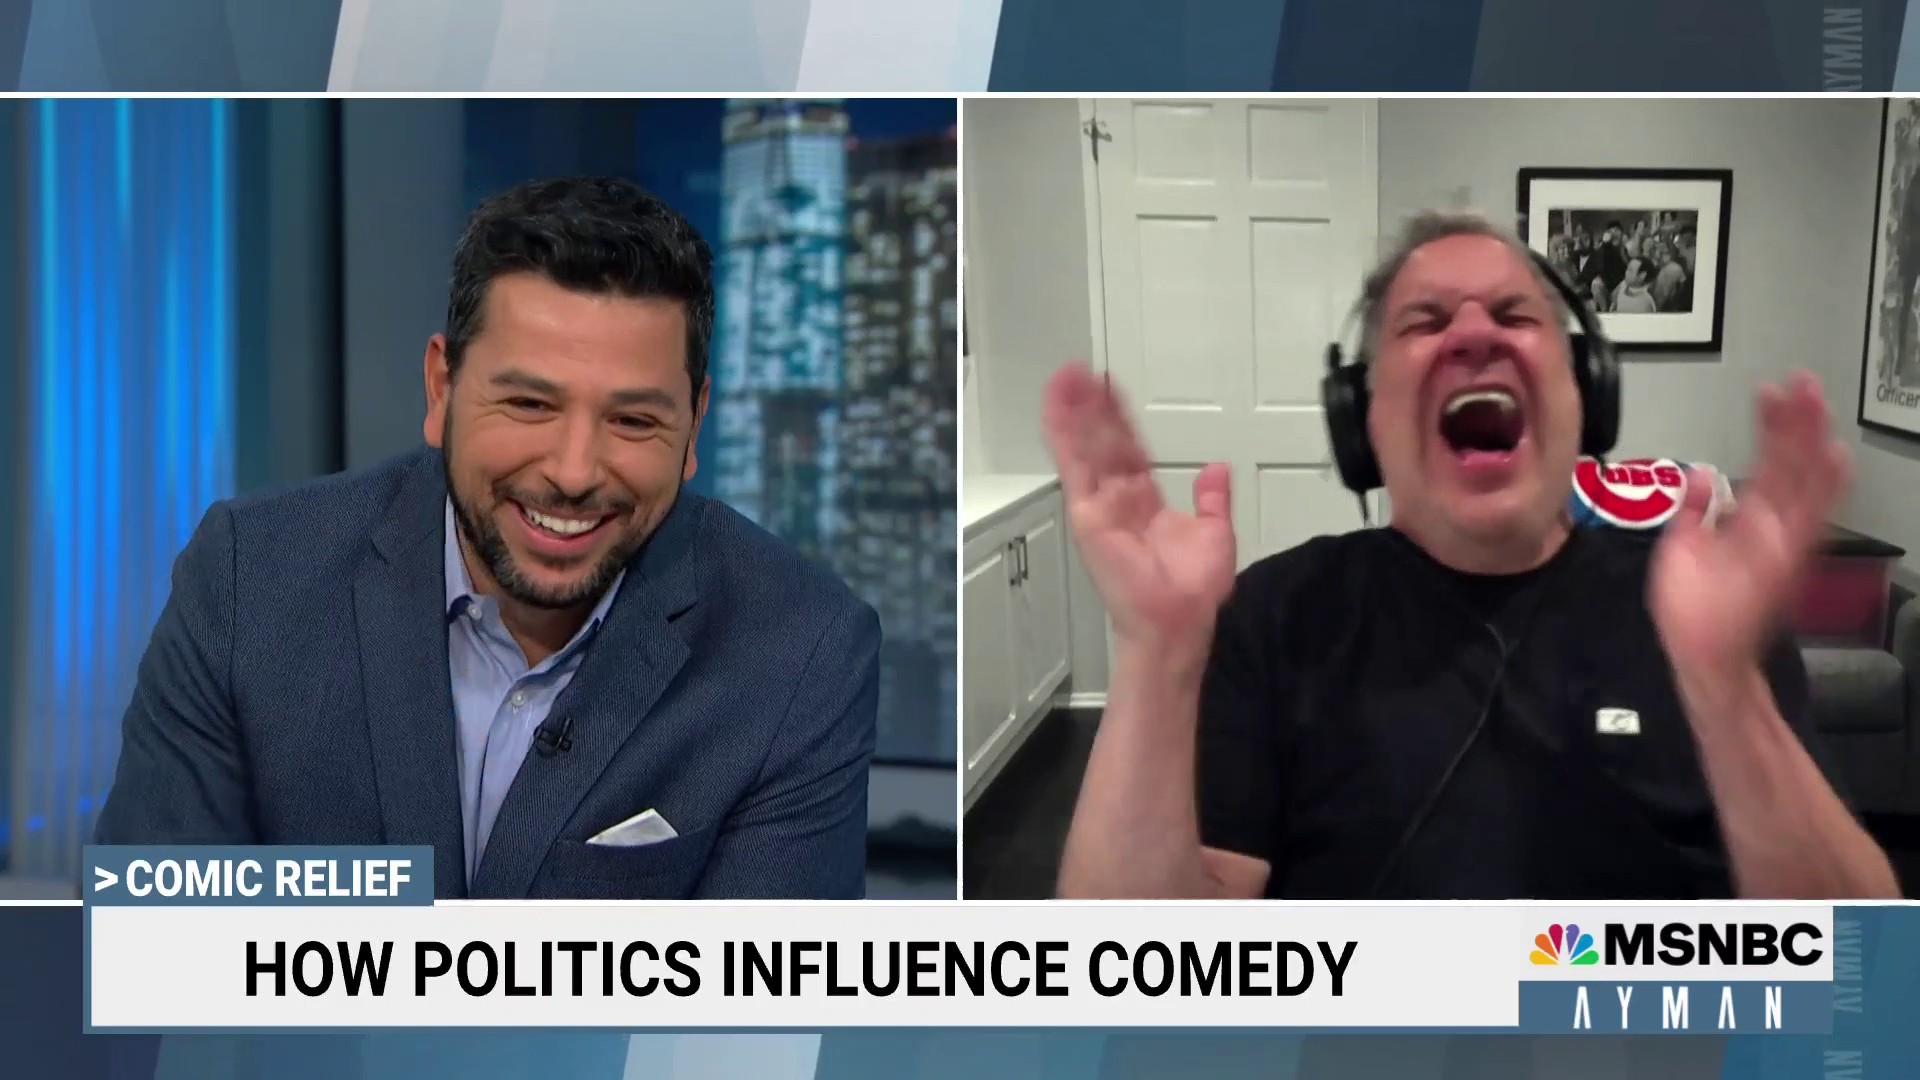 Comedian Jeff Garlin: “My job is to ease people's pain.”